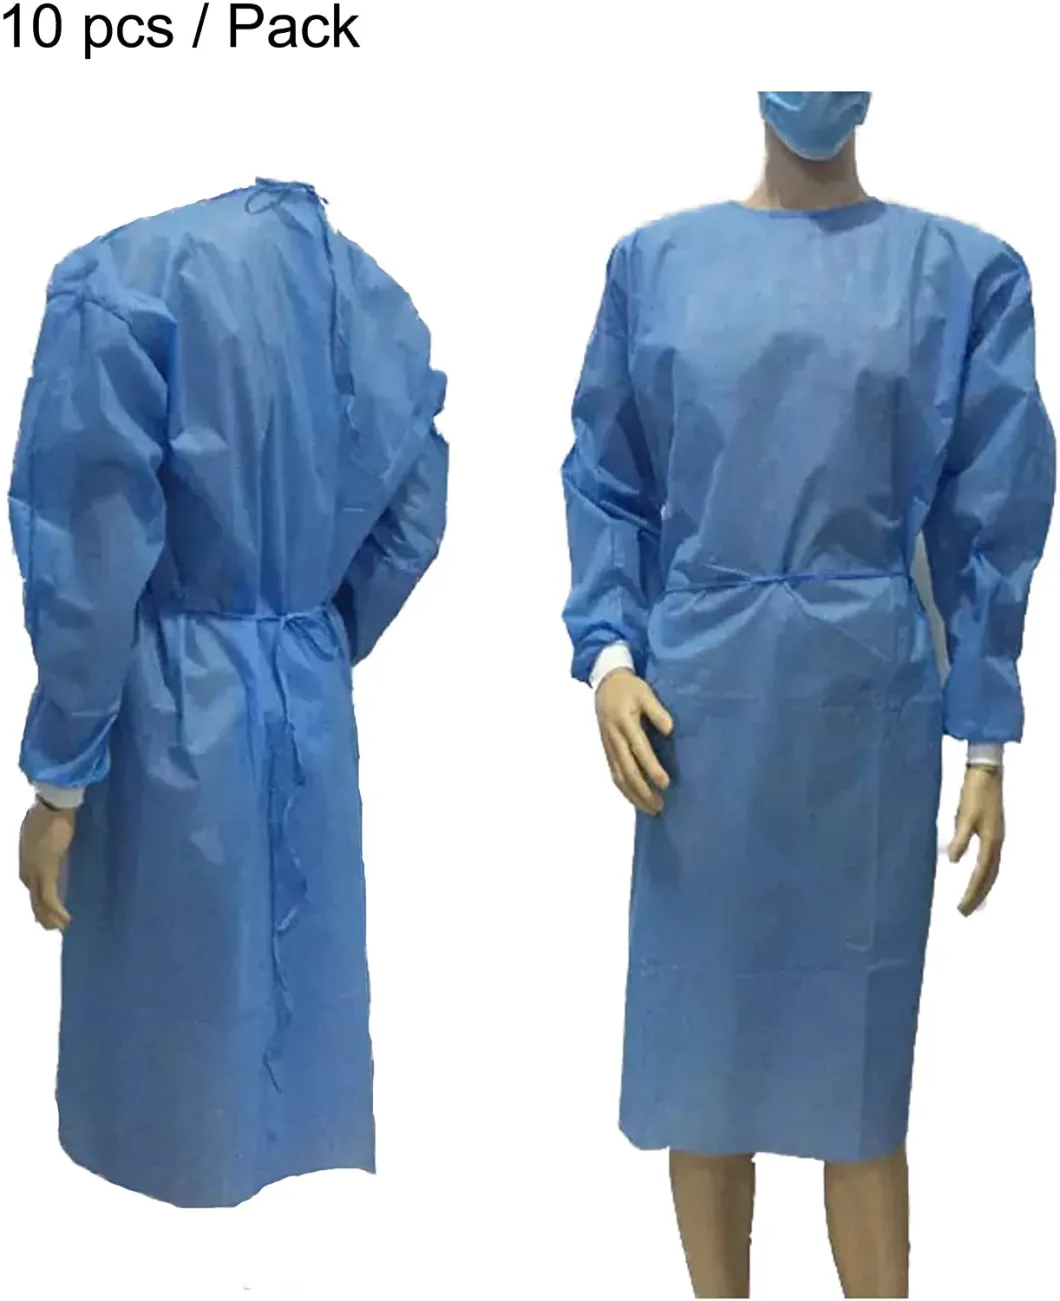 Disposable Non-Woven Fabric Isolation Protective Surgical Gown